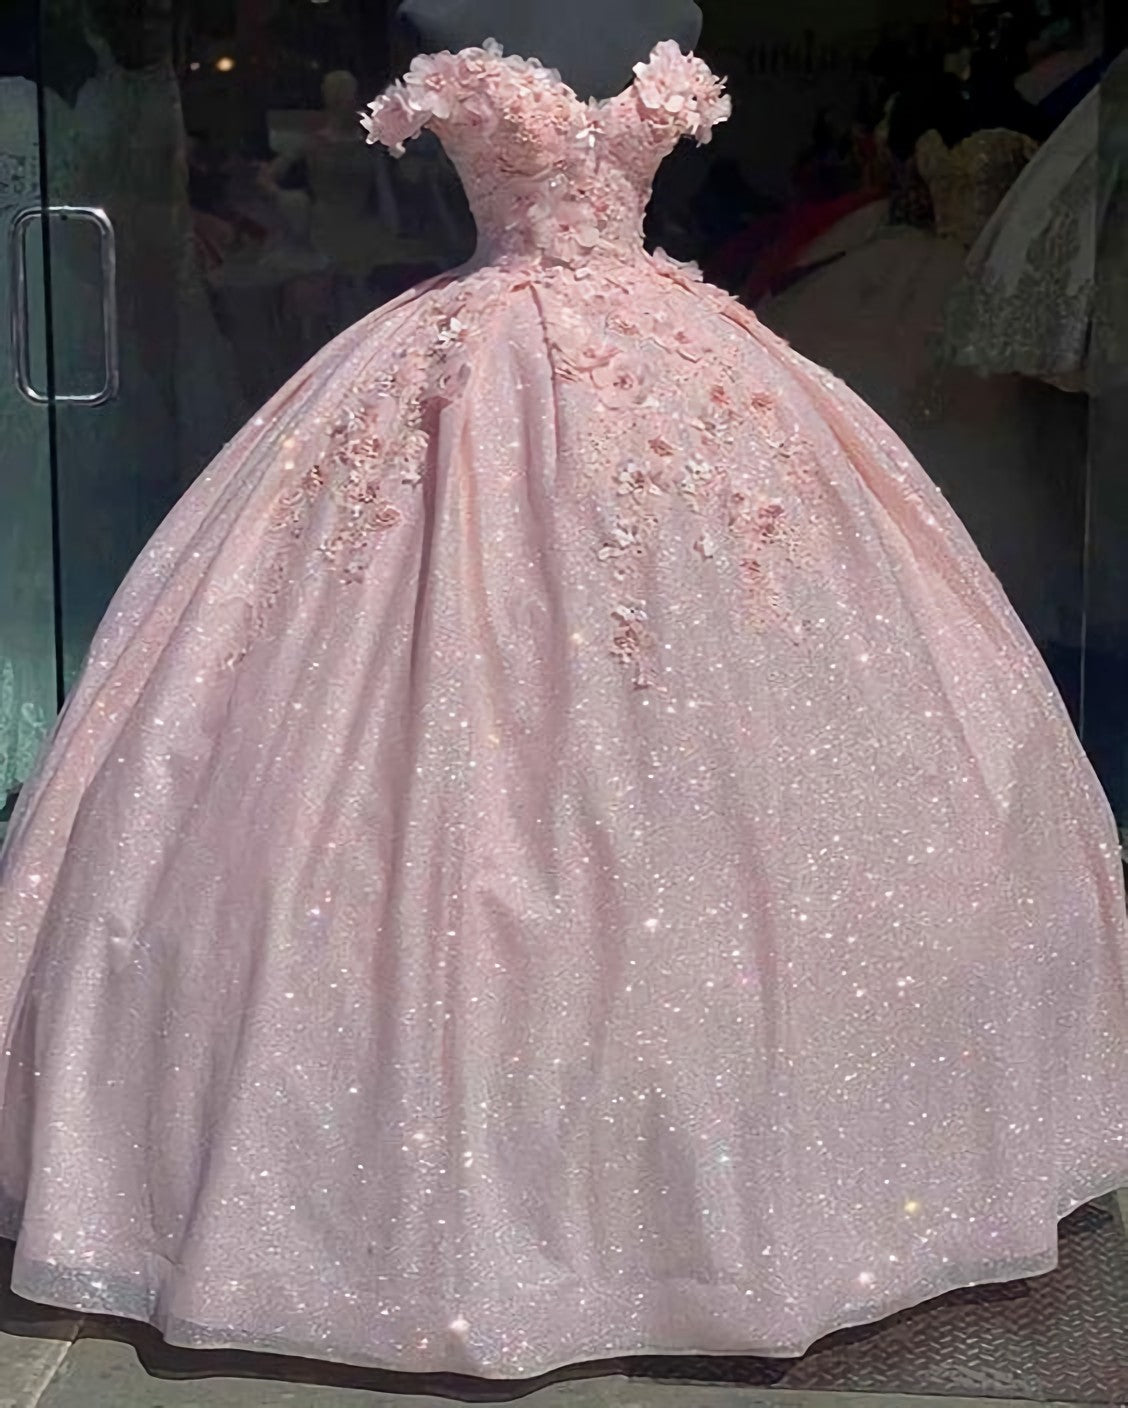 Bridesmaid Dresses Under 111, Pink Glitter Sweetheart Prom Dress, Ball Gown